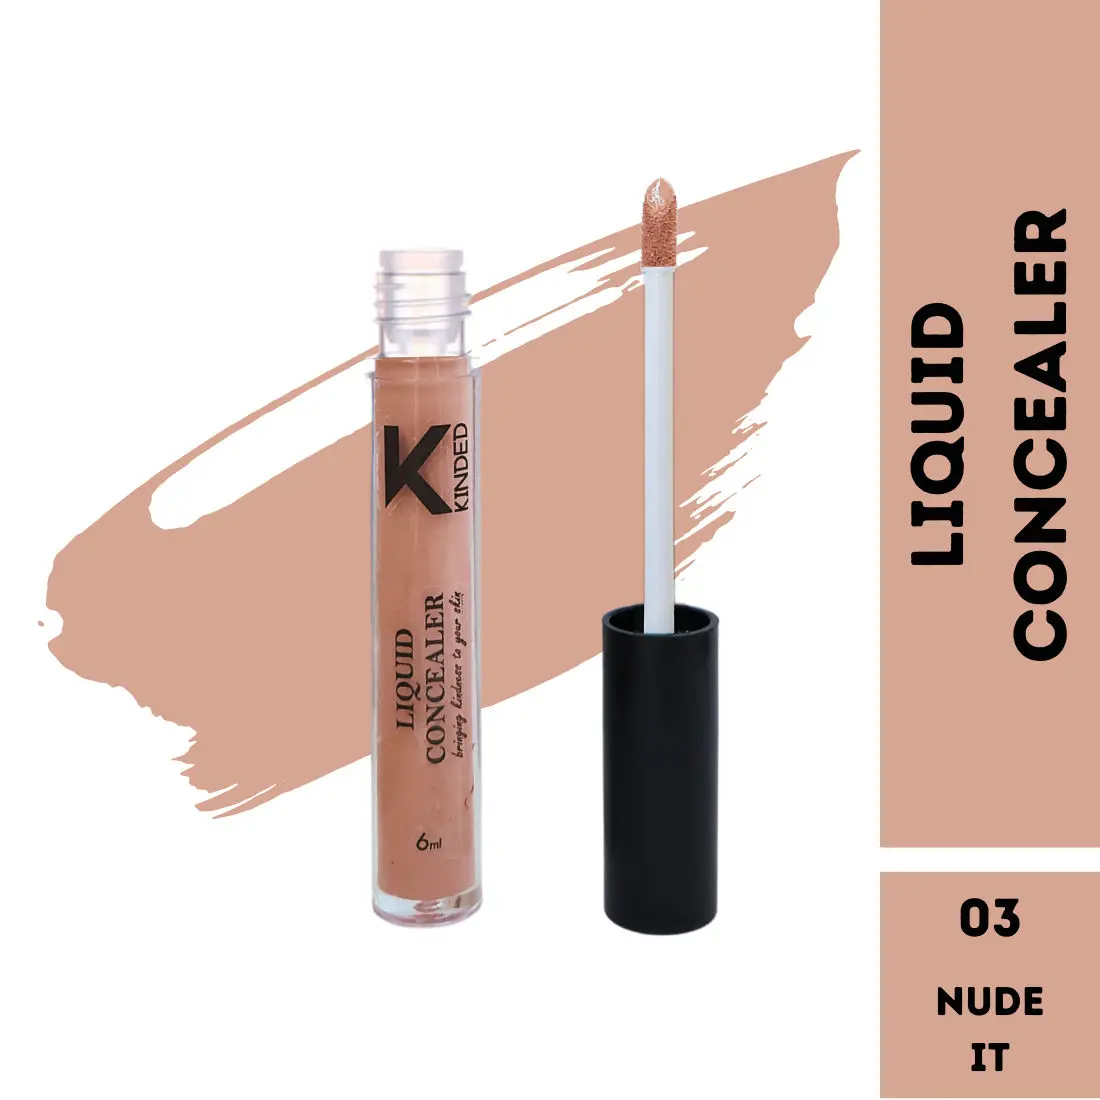 KINDED Liquid Concealer for Face Makeup Full Coverage Colour Corrector Contour Waterproof HD Pro Master Series for Dry & Oily Skin Acne Dark Circles Dark Spots (Creamy Matte, Nude It, 6 ml)